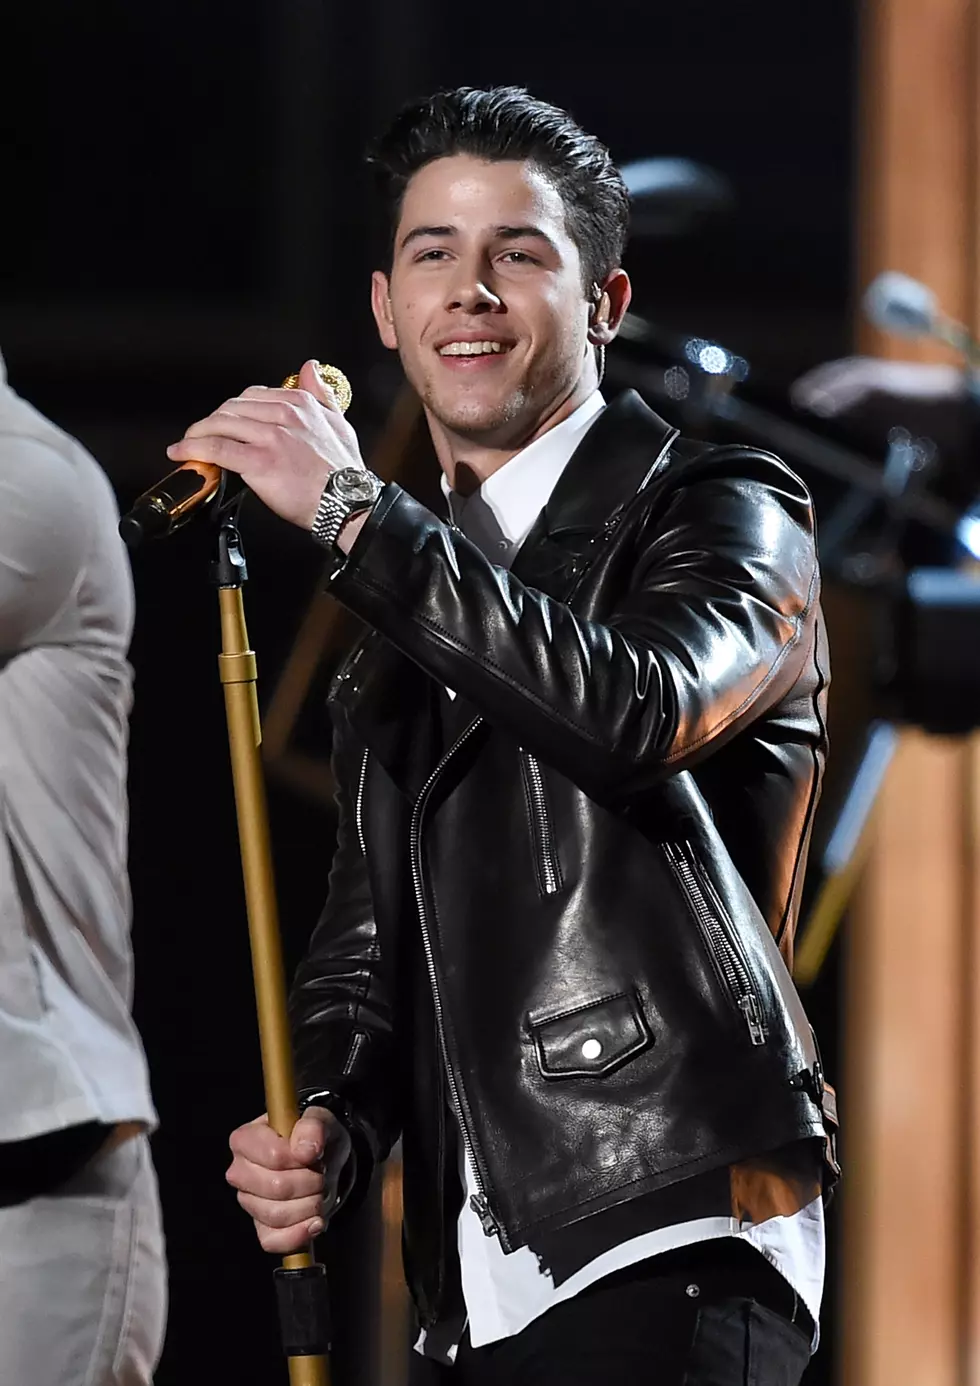 Nick Jonas Joins Us and Talks About Unlikely Discovery [VIDEO]